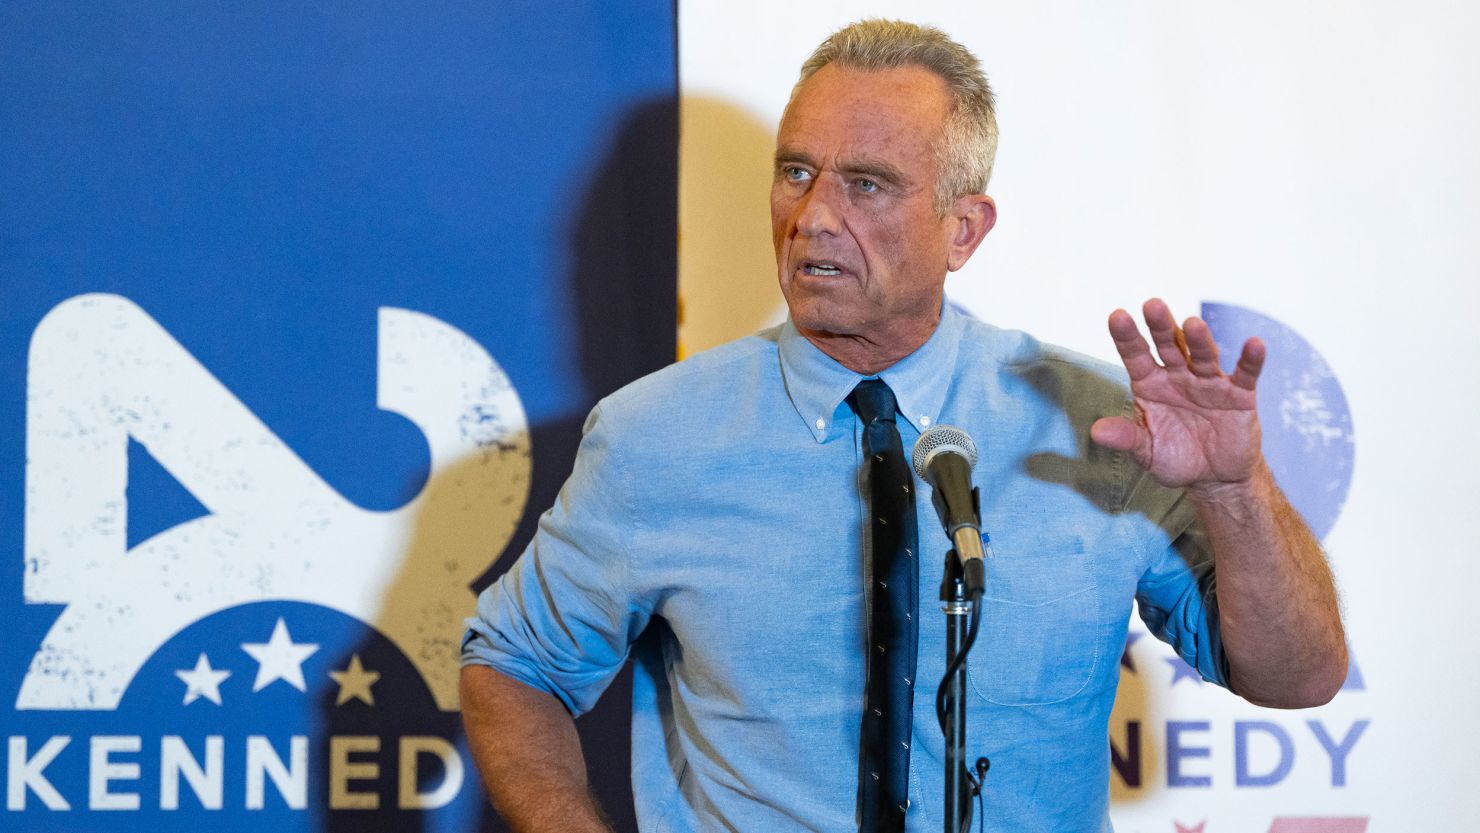 Independent presidential candidate Robert F. Kennedy Jr. takes questions from media after his campaign rally at Legends Event Center on December 20, 2023.